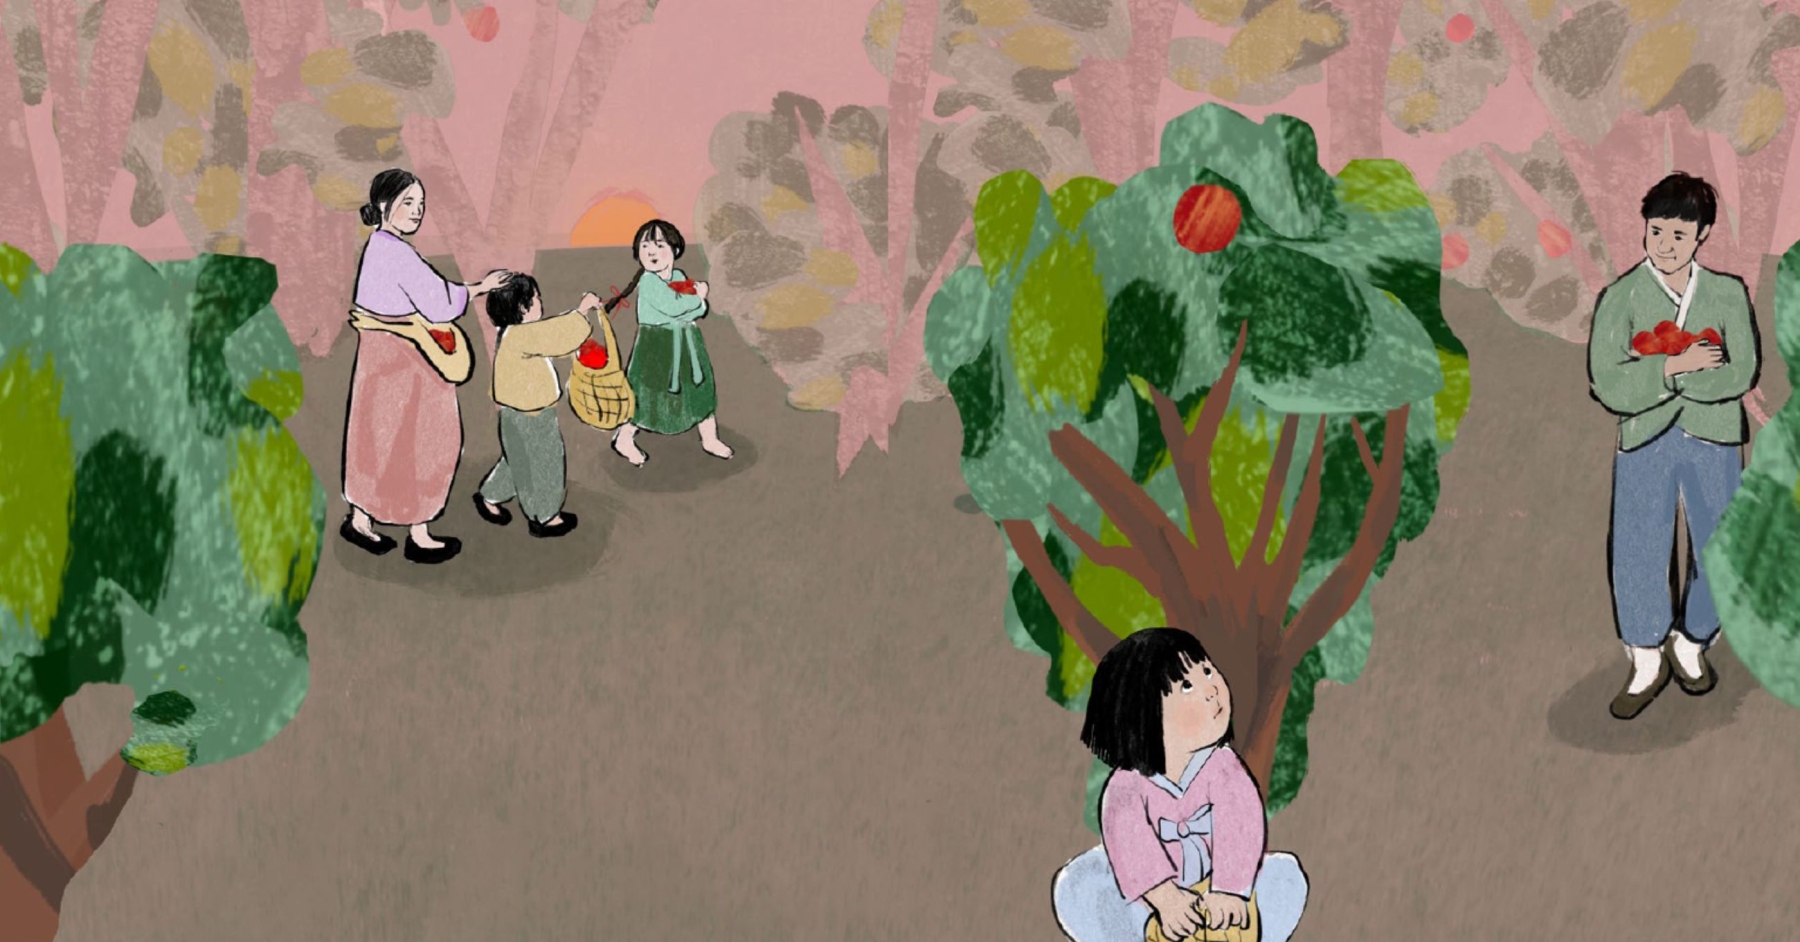 young Korean girl sitting under an apple tree surrounded by her family harvesting apples